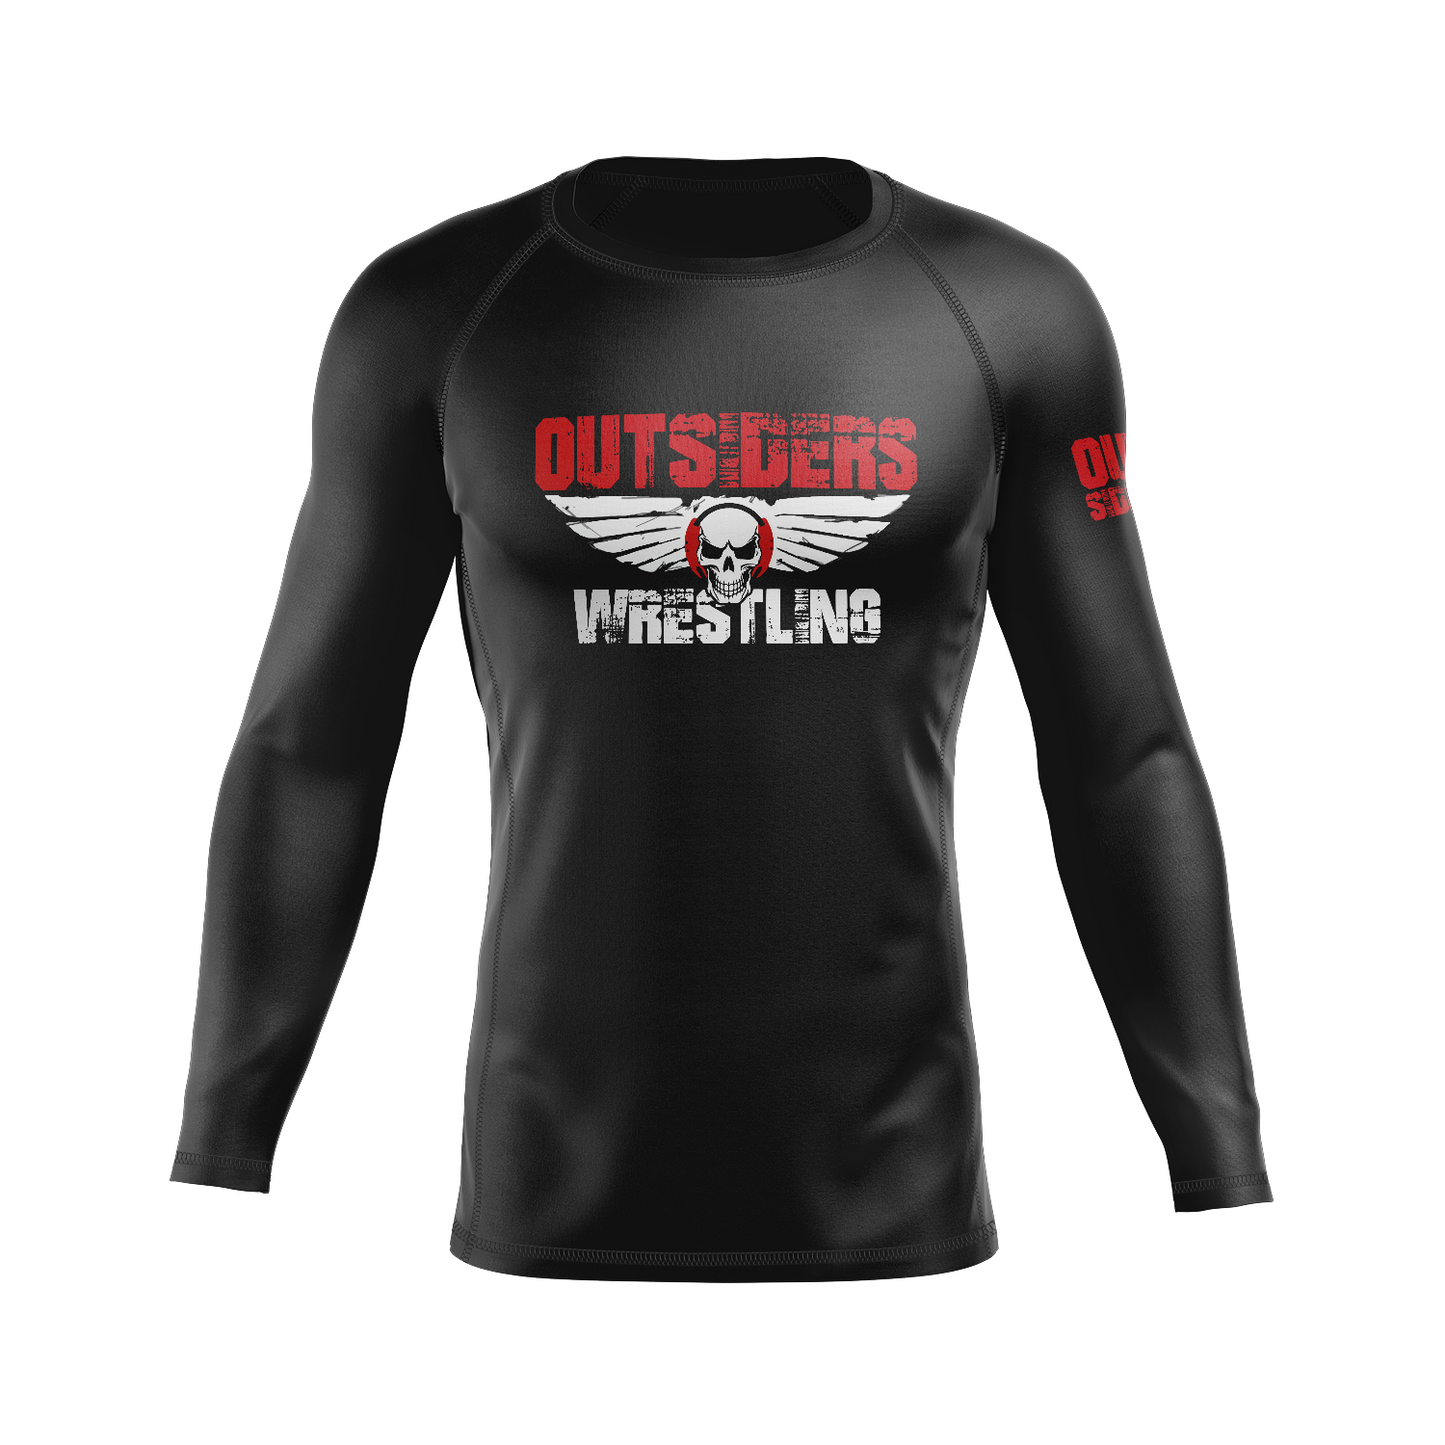 Outsiders Wrestling rash guard men's Standard Issue, black and red